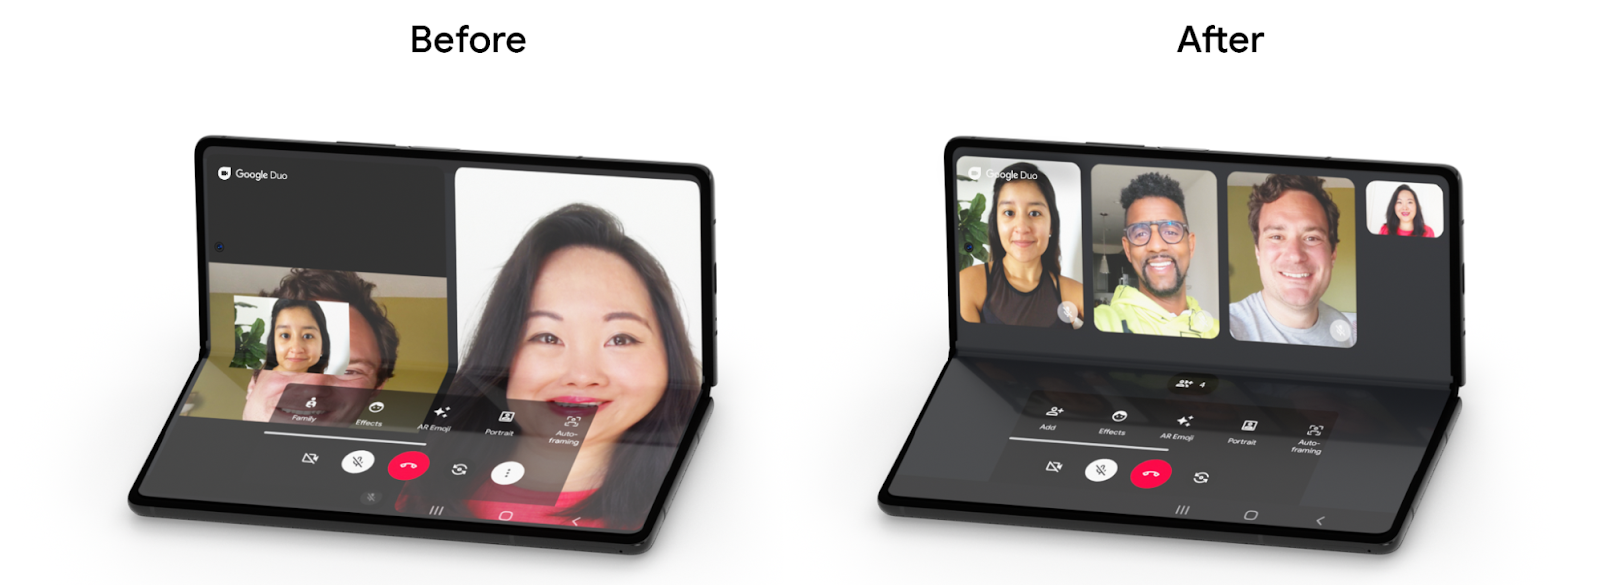 Image showing google Duo's optimized experience for foldable devices